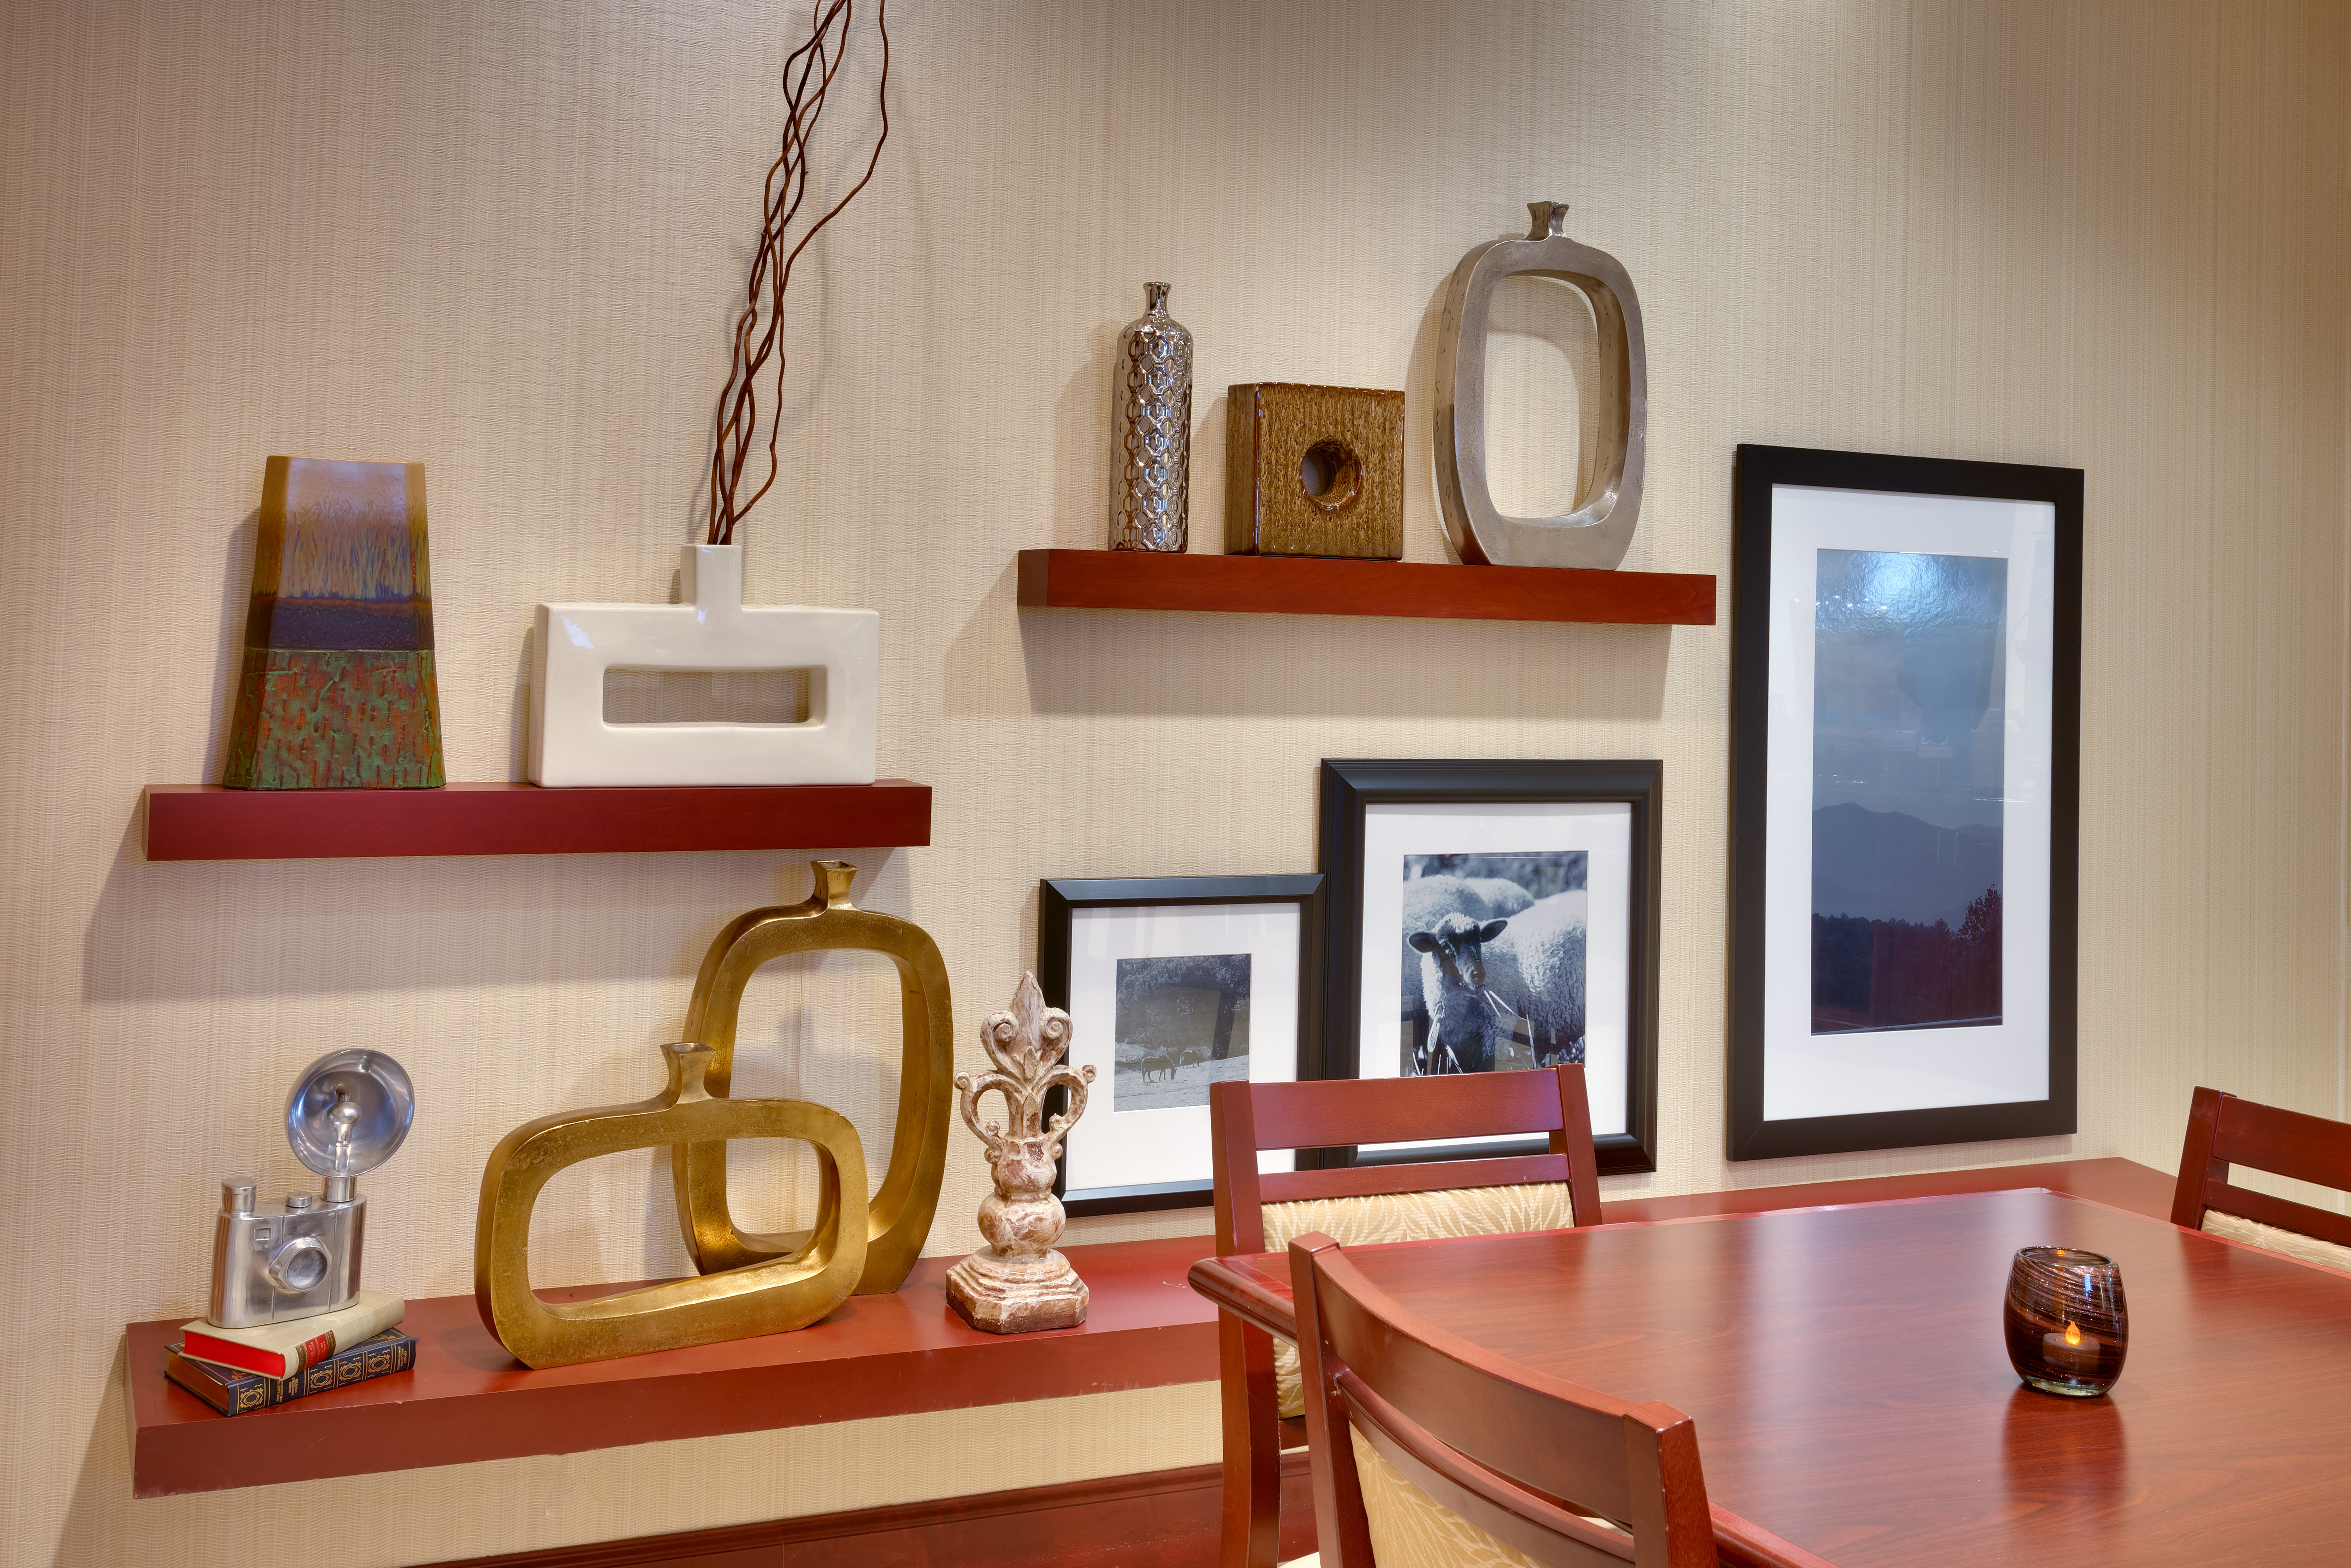 Dining Table, Chairs, and Art on Display in Lobby Breakfast Area